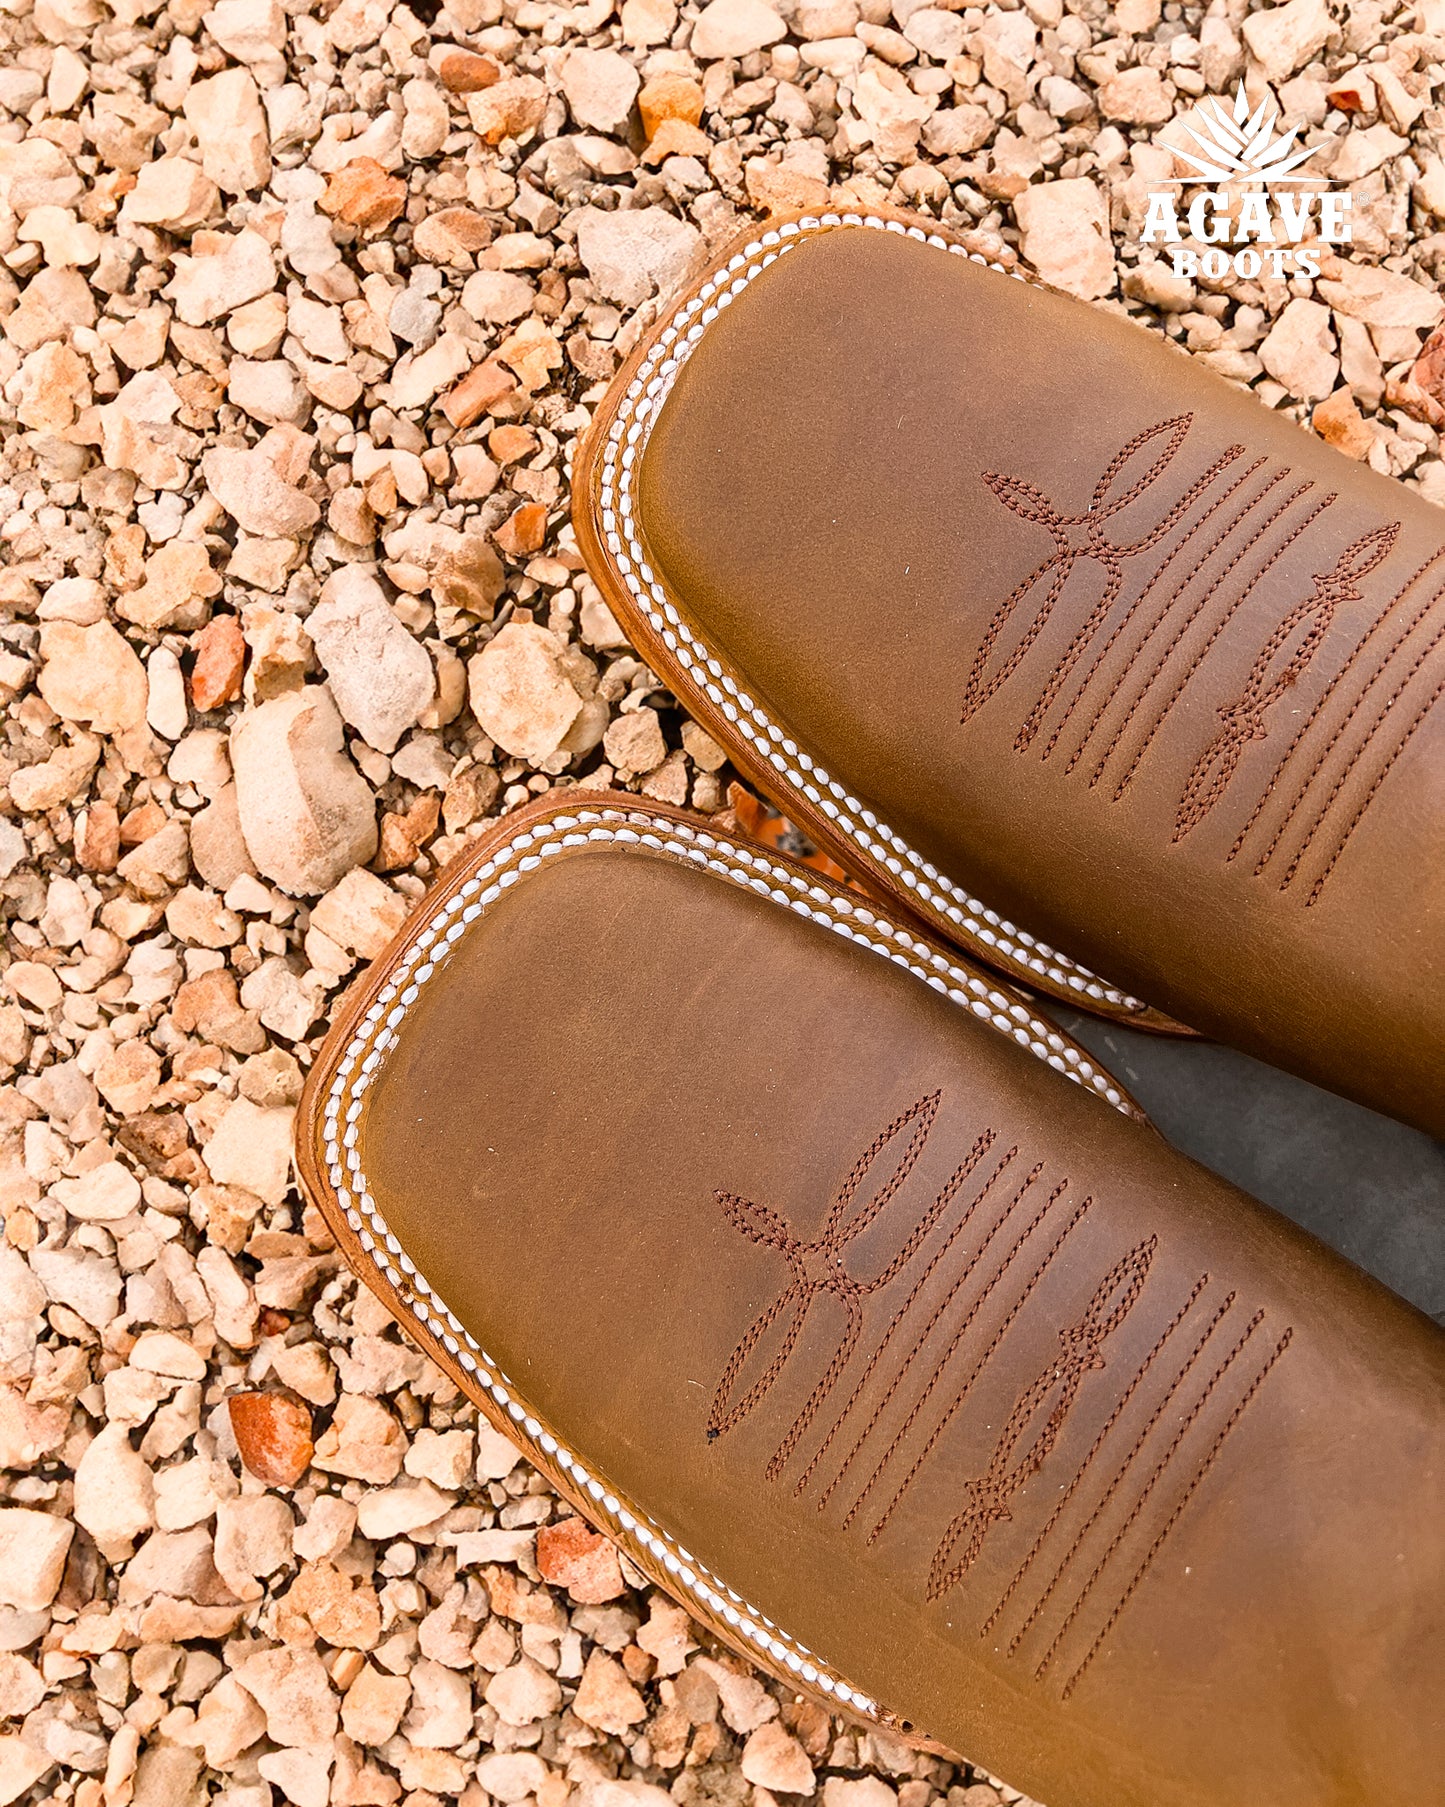 THANG | MEN SQUARE TOE WESTERN COWBOY BOOTS